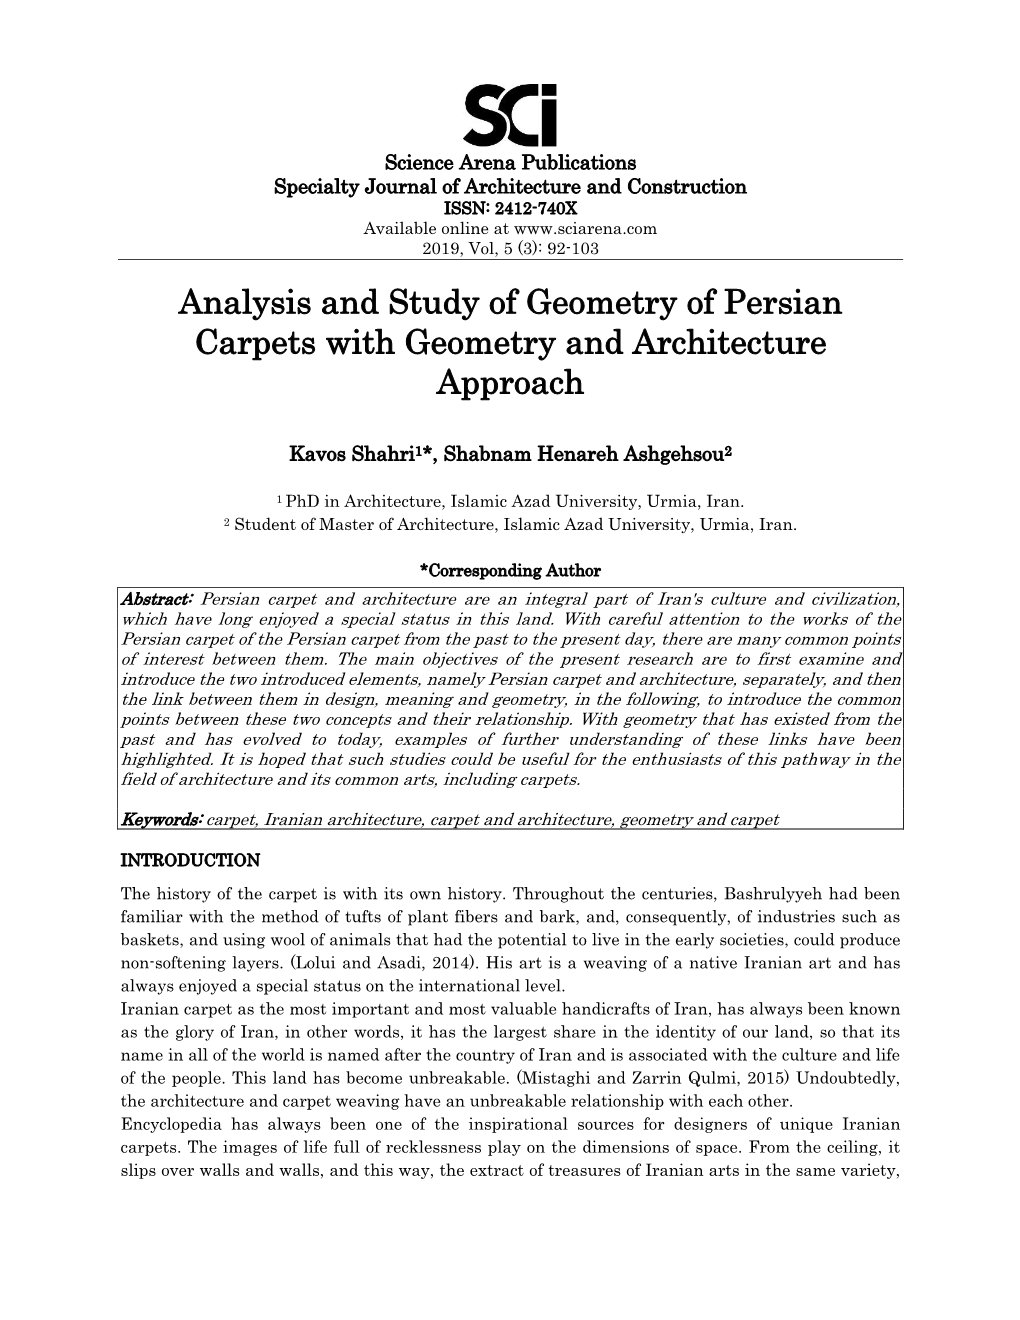 Analysis and Study of Geometry of Persian Carpets with Geometry and Architecture Approach